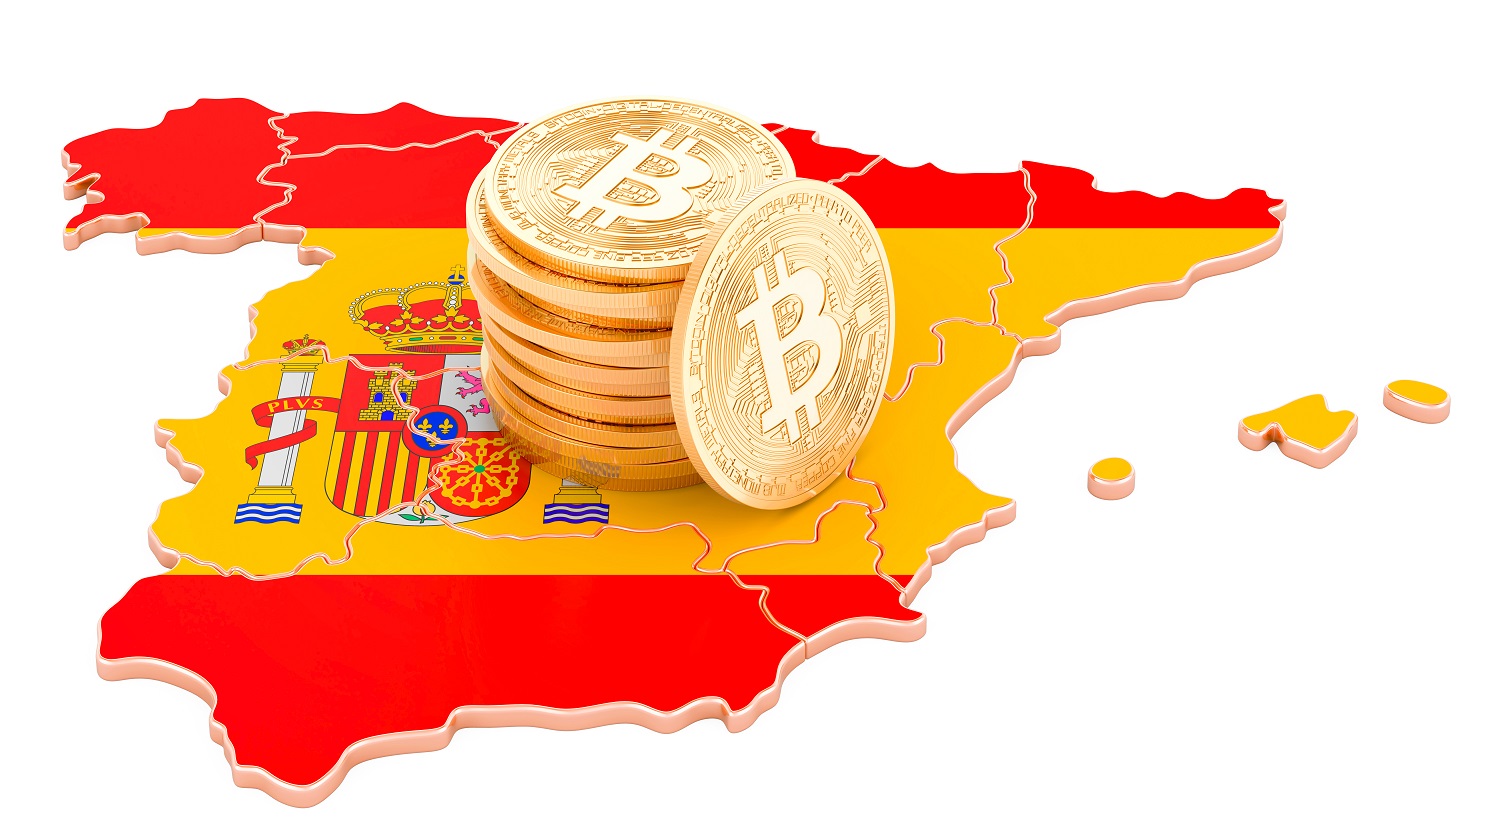 A 3D map of Spain, decorated in the colors of the Spanish national flag, with a bunch of metal tokens meant to represent Bitcoin.